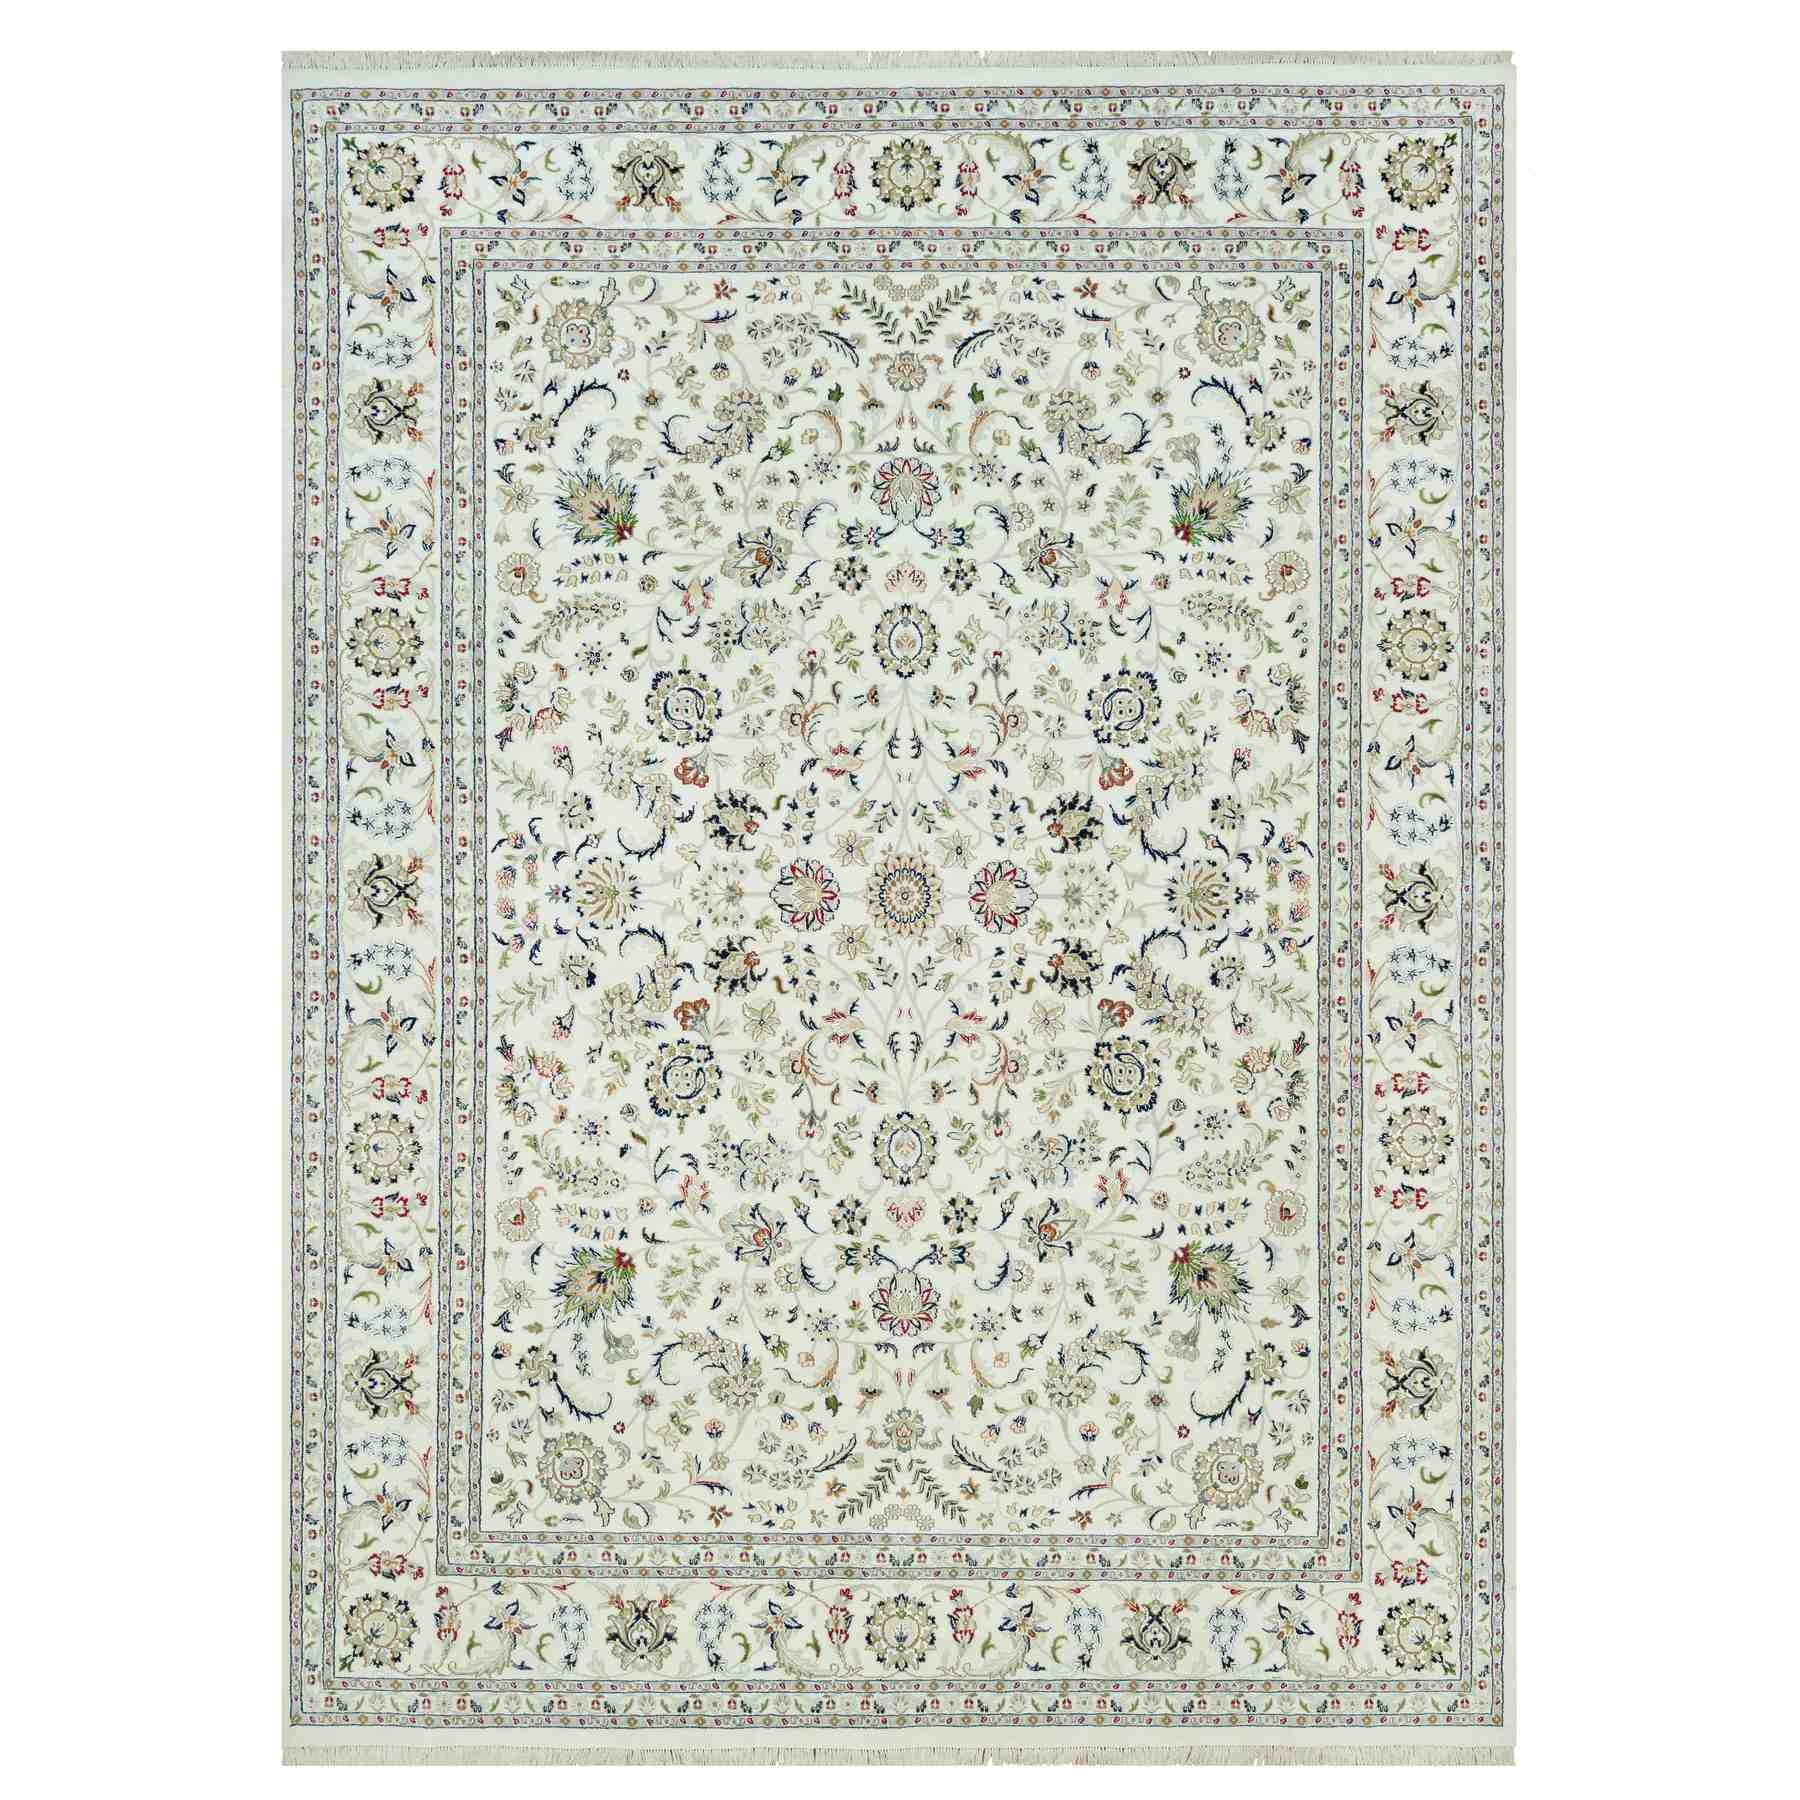 Doive White, Nain with All Over Flower Design, 250 KPSI, 100% Wool, Hand Knotted, Oriental Rug